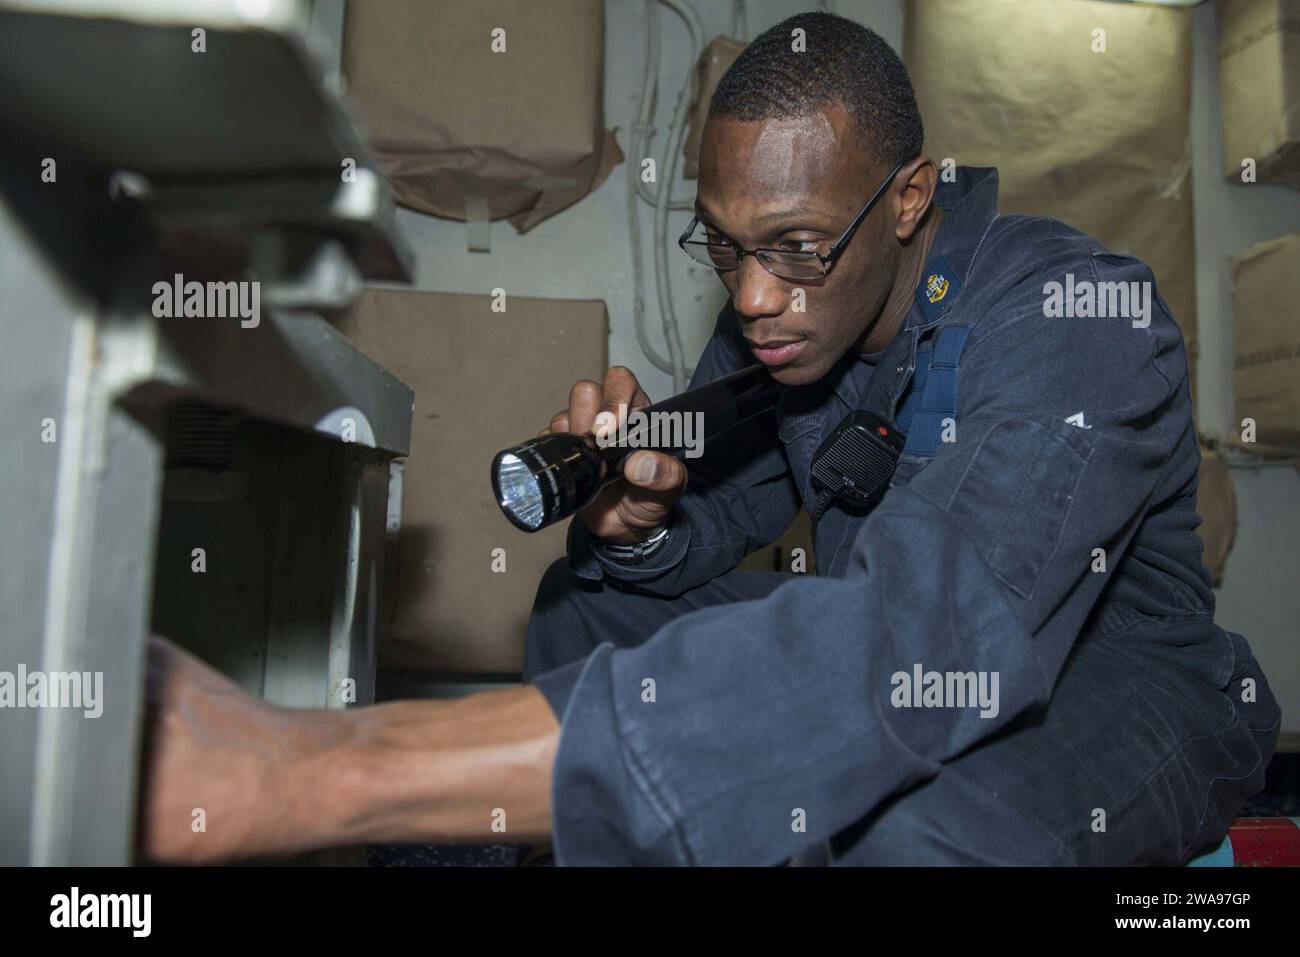 US military forces. 180519MK318-0106 MEDITERRANEAN SEA (May 19, 2018) Chief Damage Controlman Damarcus McCoy inspects an Aqueous Film Forming Foam (AFFF) station aboard the Nimitz-class aircraft carrier USS Harry S. Truman (CVN 75). As the Carrier Strike Group 8 flag ship, Truman's support of Operation Inherent Resolve demonstrates the capability and flexibility of U.S. Naval Forces, and its resolve to eliminate the terrorist group ISIS and the threat it poses. (U.S. Navy photo by Mass Communication Specialist 3rd Class Victoria Granado/Released) Stock Photo